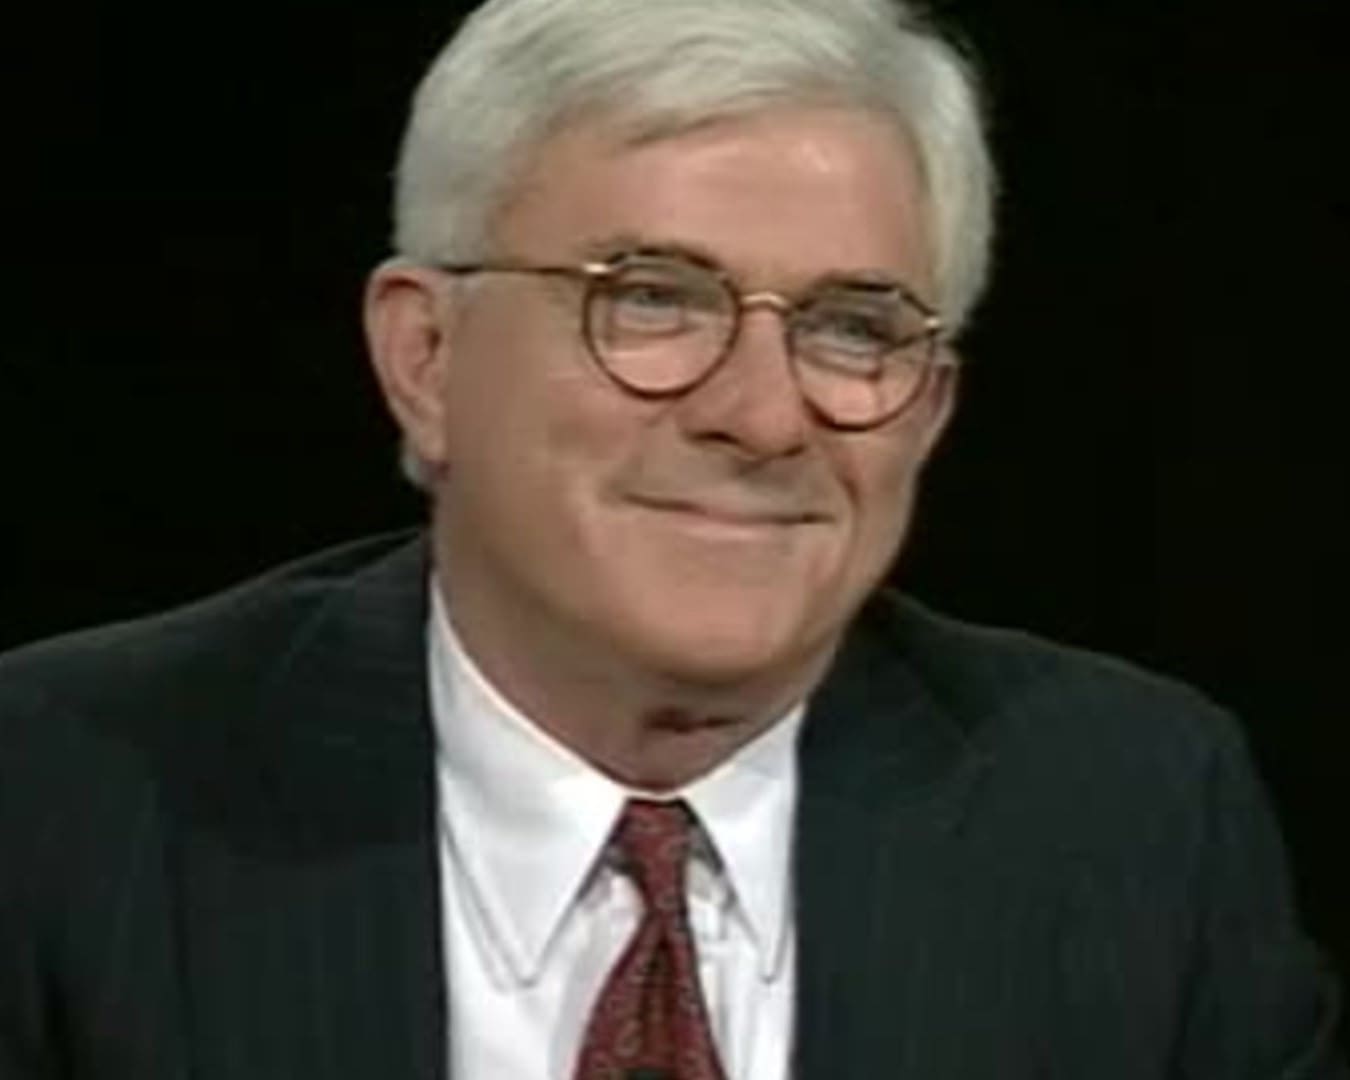 In 1986, Phil Donahue and his wife purchased a 17-room home in Westport, Connecticut, for an undisclosed amount